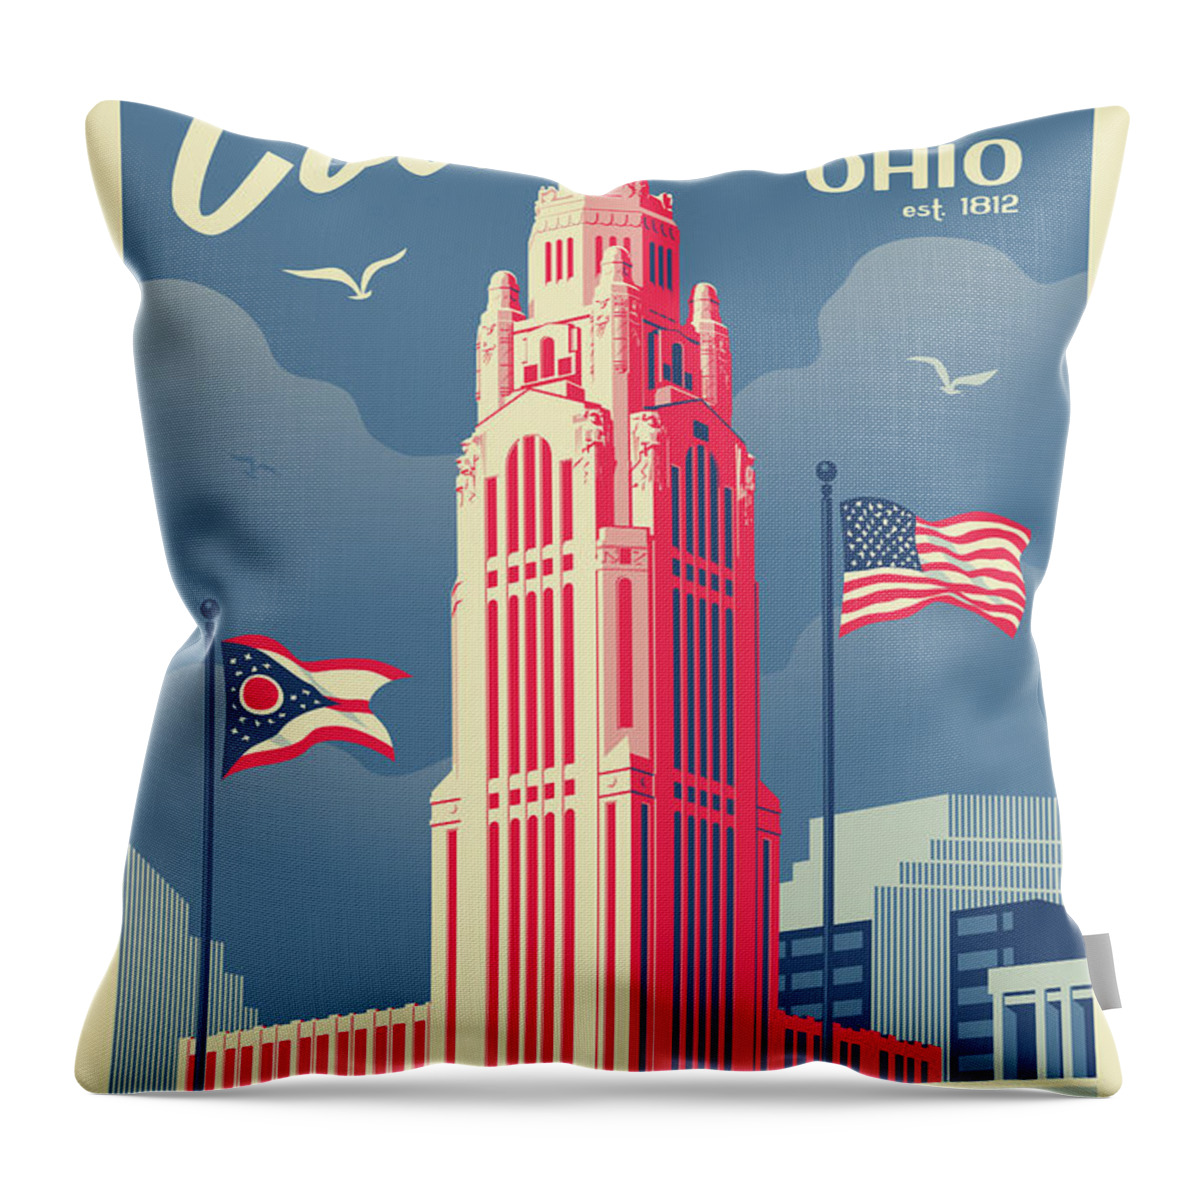 Travel Poster Throw Pillow featuring the digital art Columbus Poster - Vintage Style Travel by Jim Zahniser